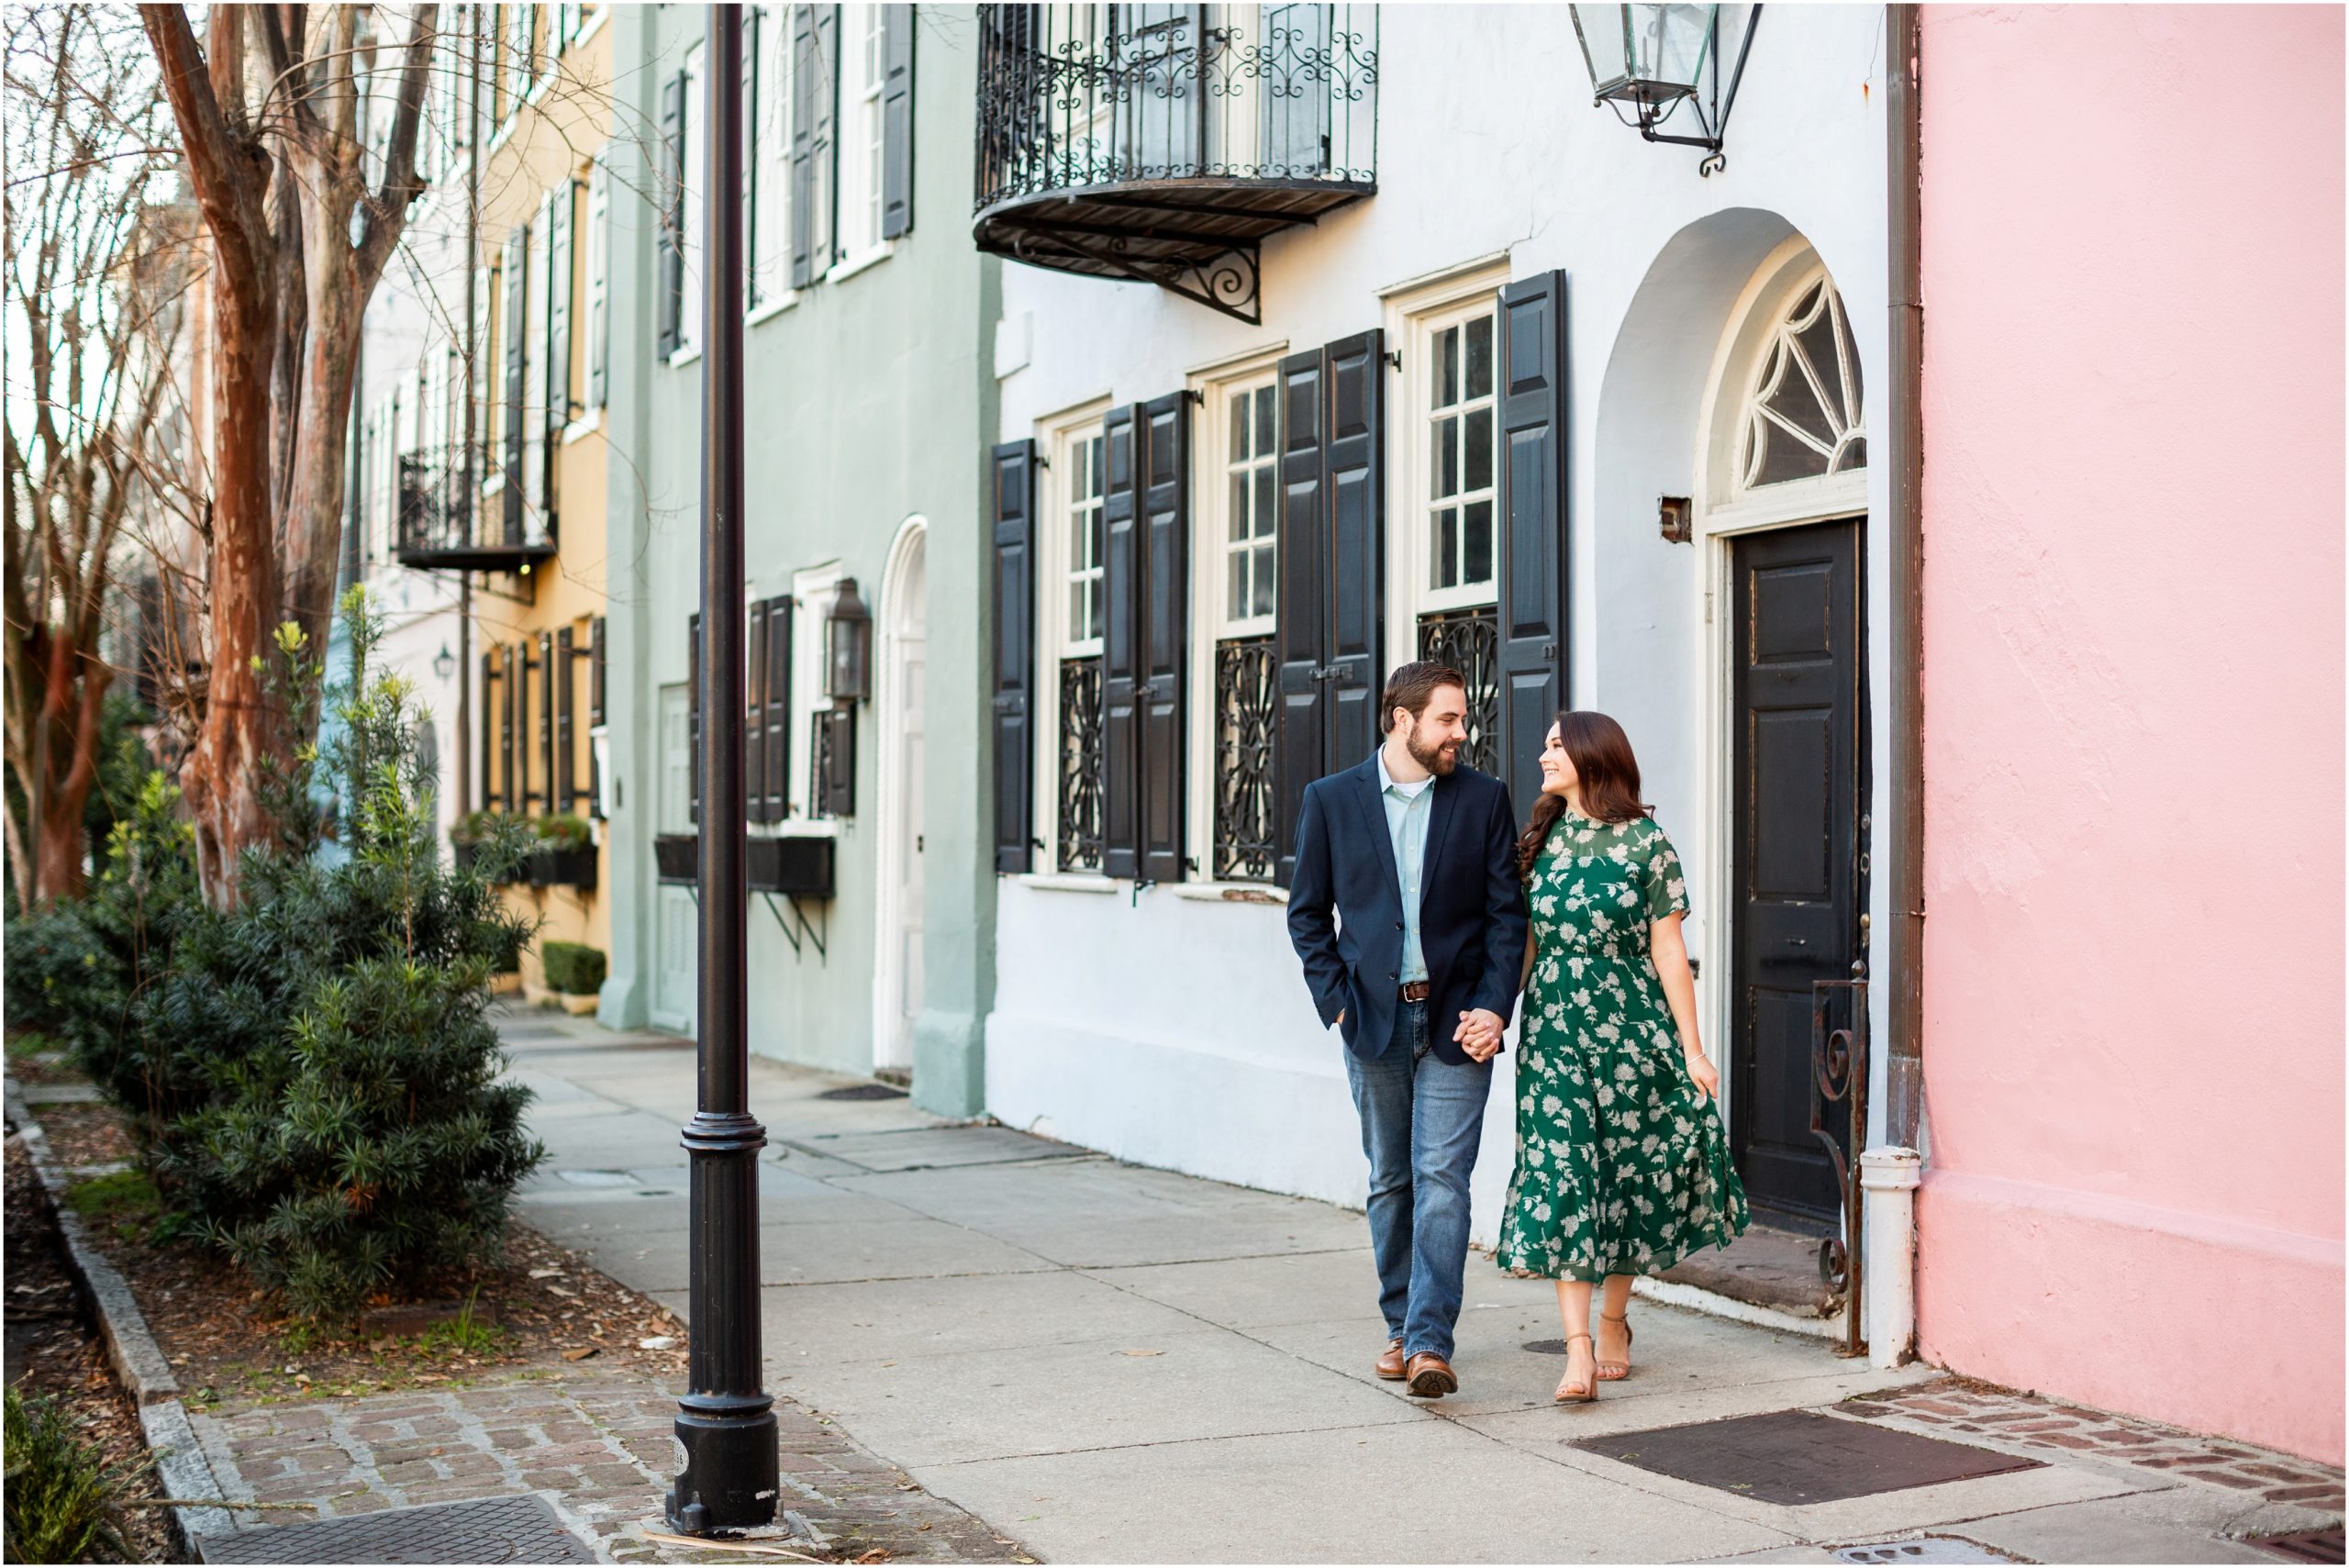 Downtown Charleston Engagement Session, Charleson Engagement Session, Charleston South Carolina Engagement Session, Charleston Engagement Photography, Charleston Engagement Photographer, Charleston Wedding Photographer, Rainbow Road Engagement Session, Green Engagement Session Dress, Engagement Session Outfit, Engagement Session Inspiration, Charleston Engagement Session Inspiration